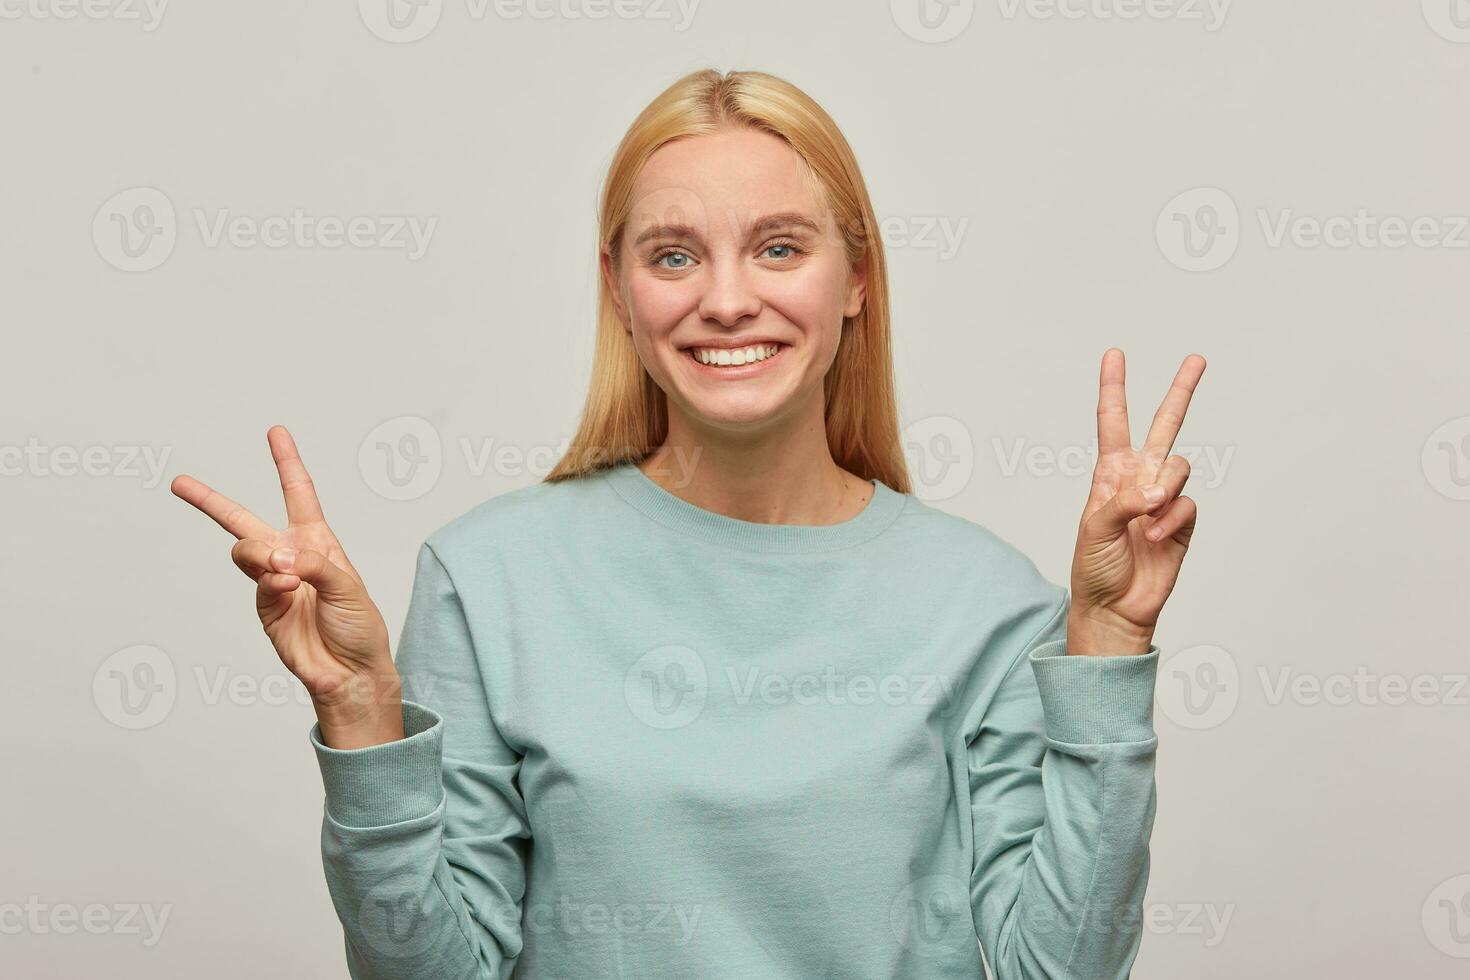 Lovely young blonde girl has fun, smiles, shows peace victory sign with fingers on both hands, wearing blue casual sweatshirt, isolated over grey background photo